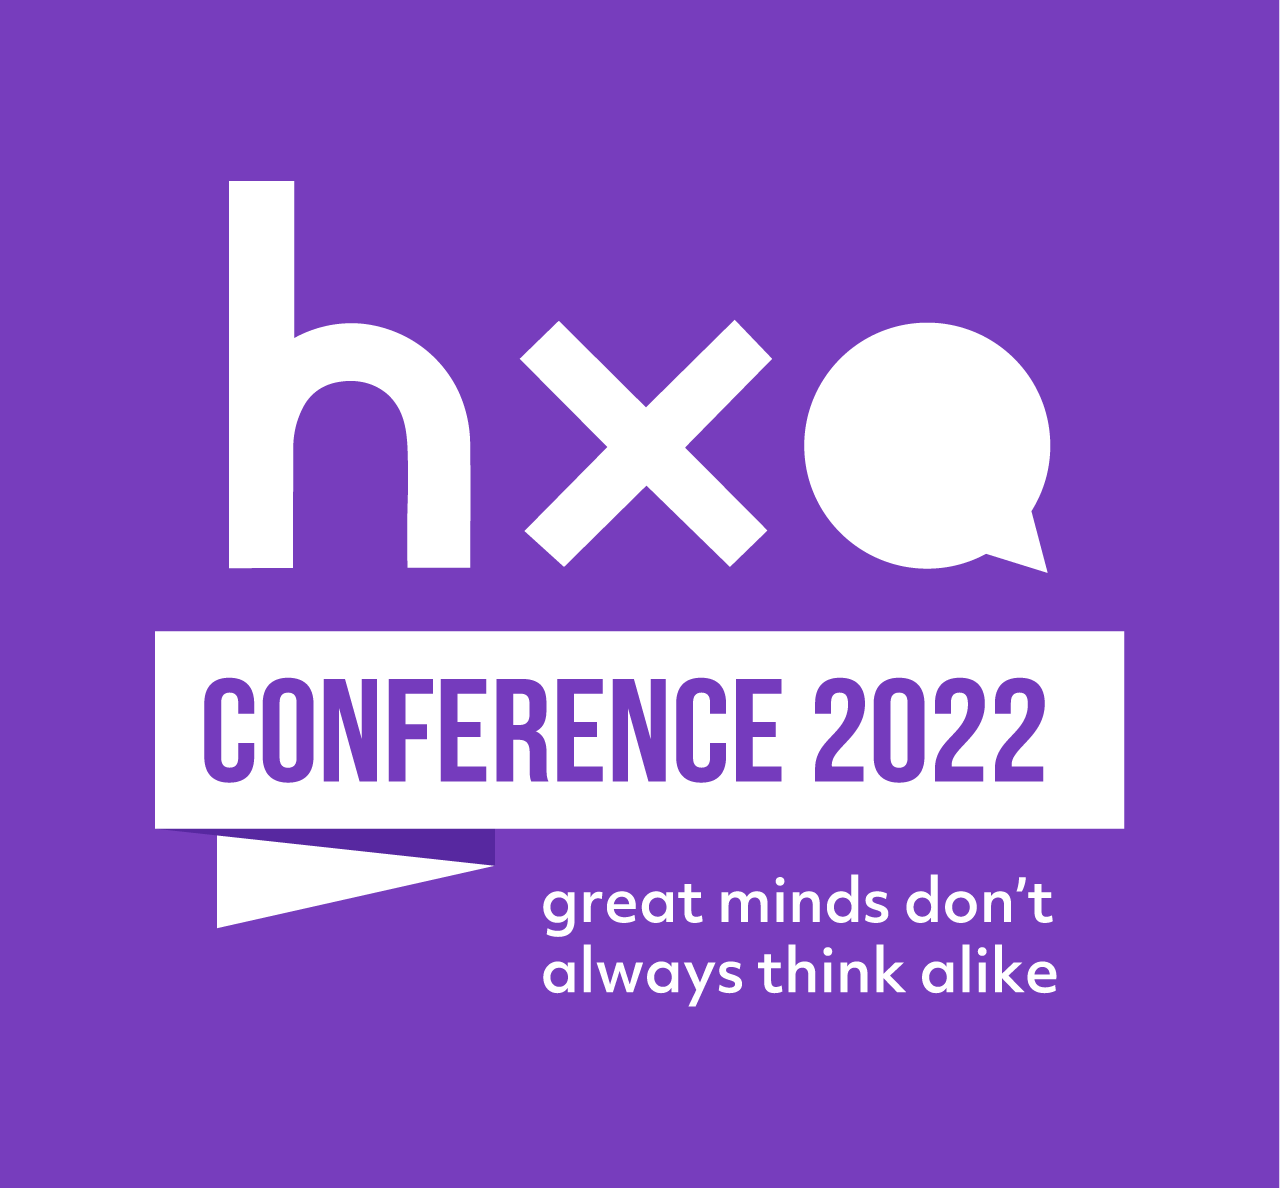 hxa conference 2022